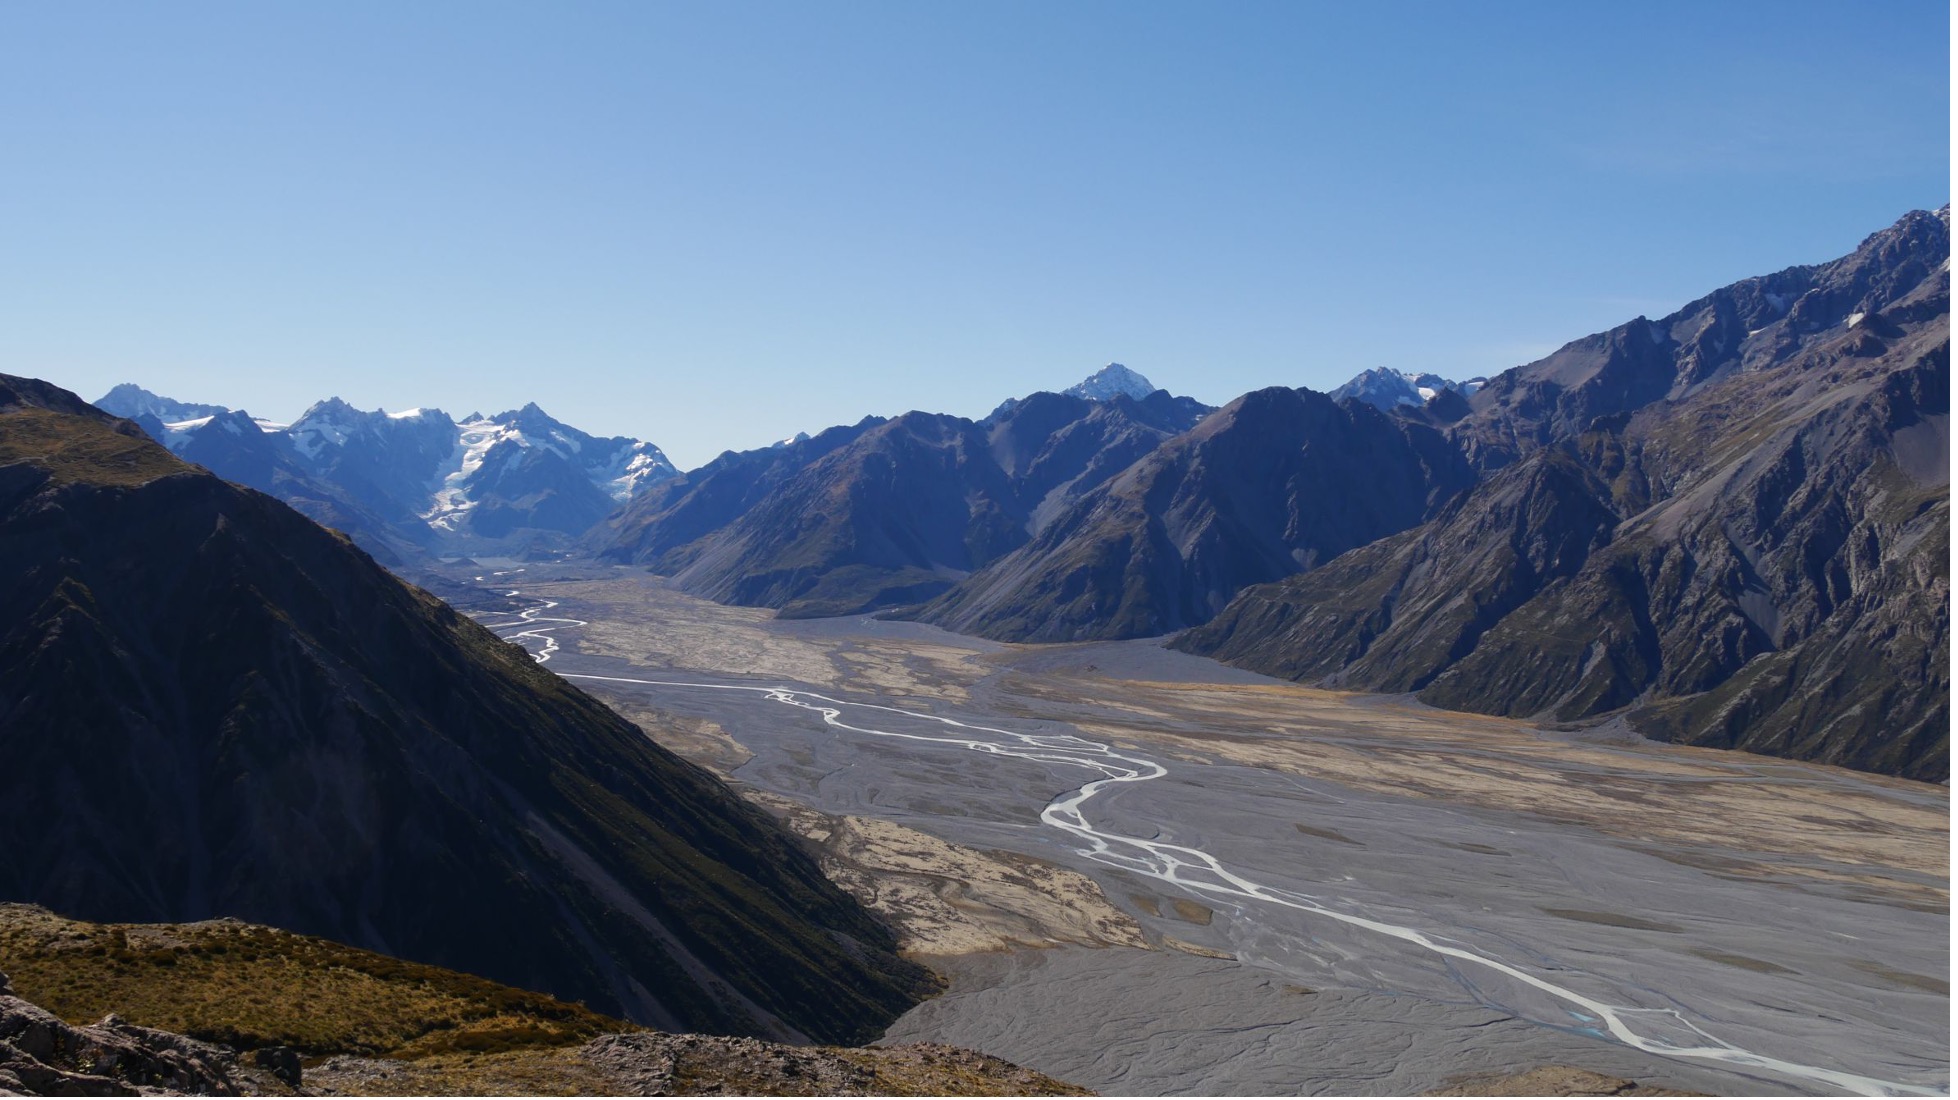 Godley glacier and river in New Zealand’s Southern Alps